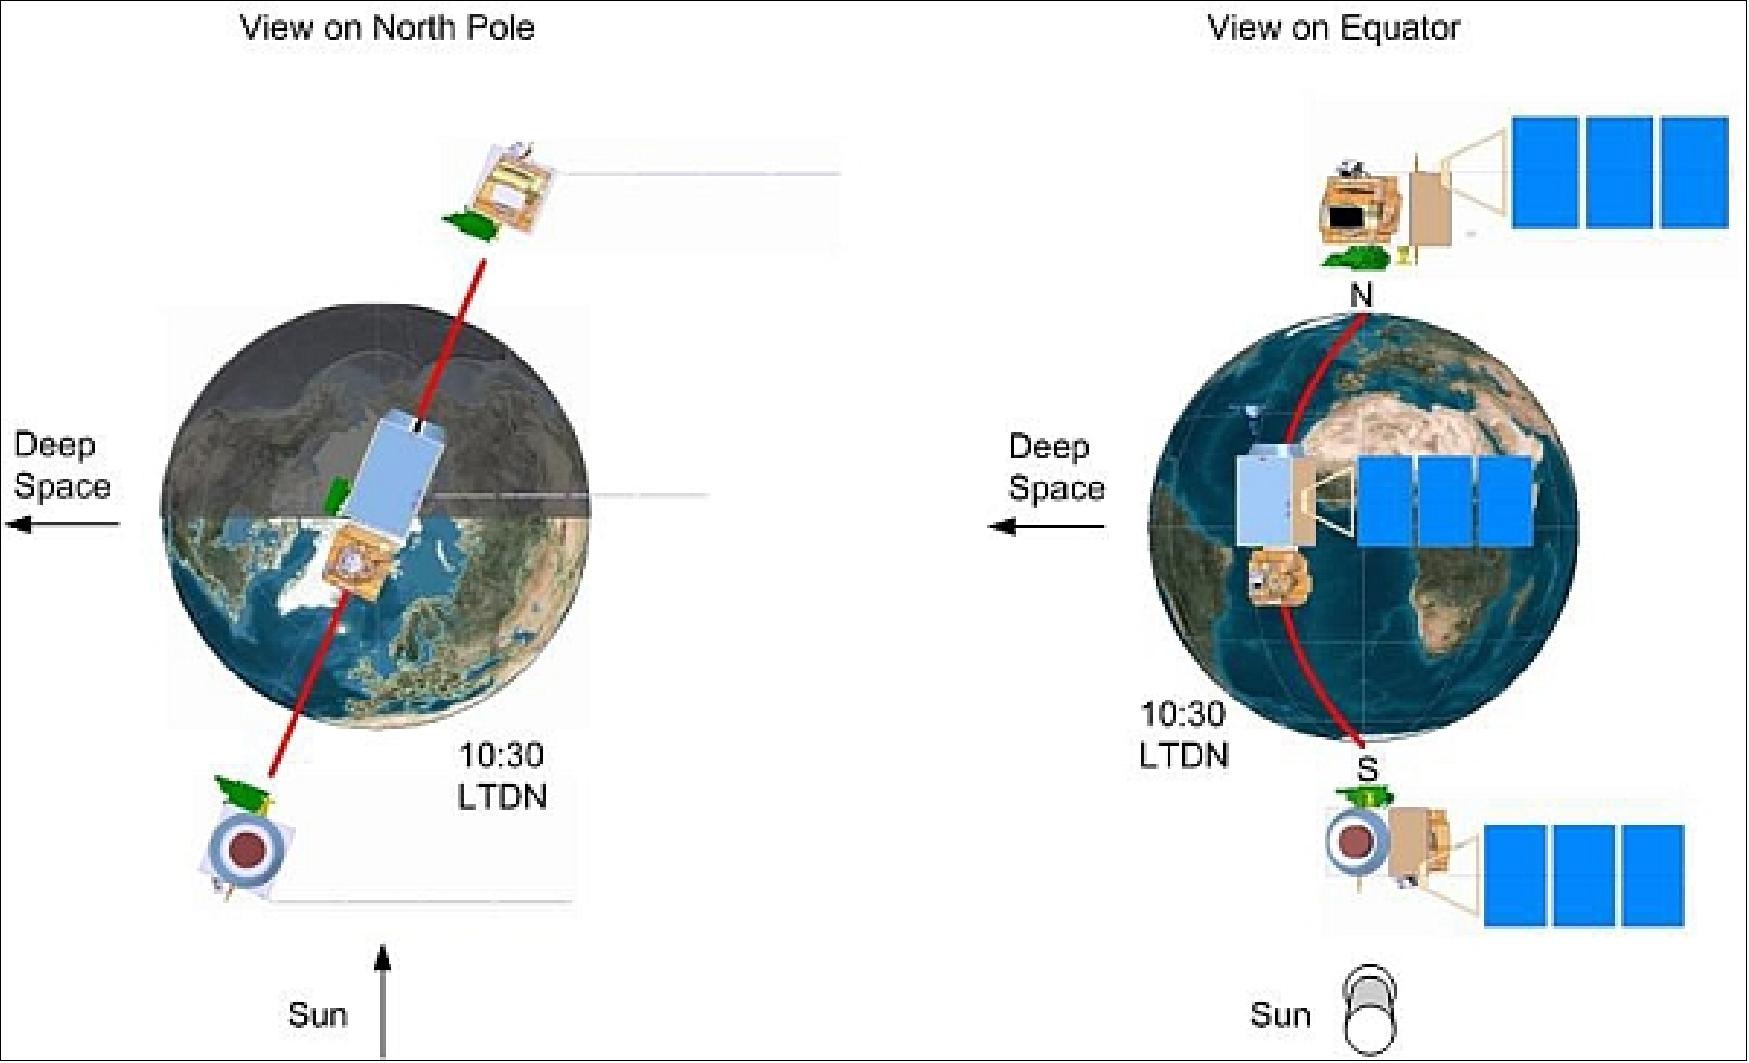 Twin observation configuration of the Sentinel-2 spacecraft constellation